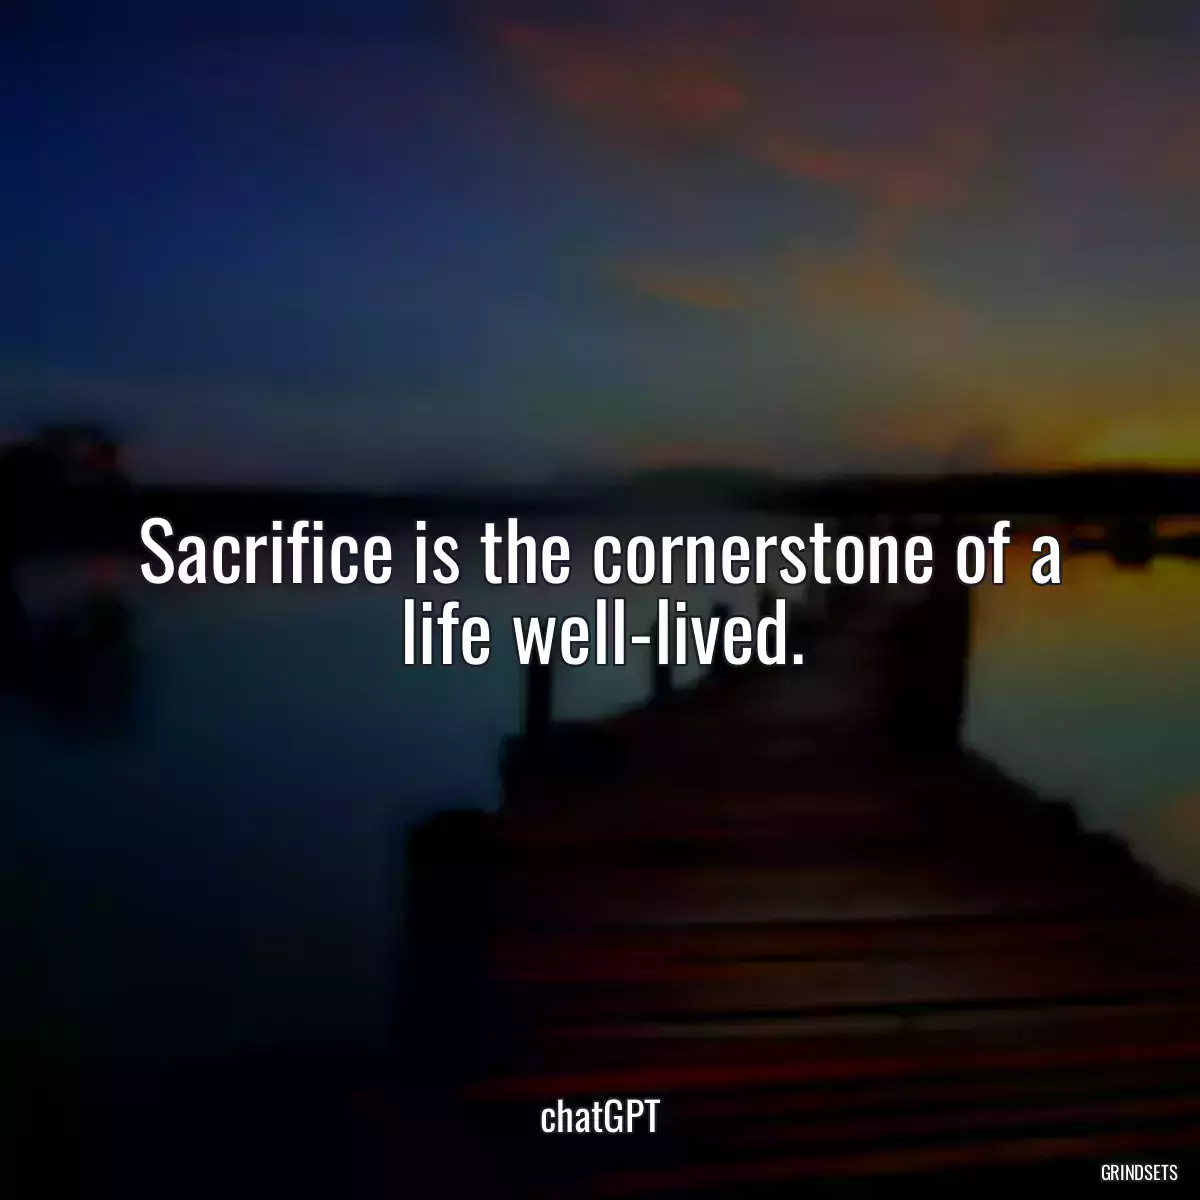 Sacrifice is the cornerstone of a life well-lived.